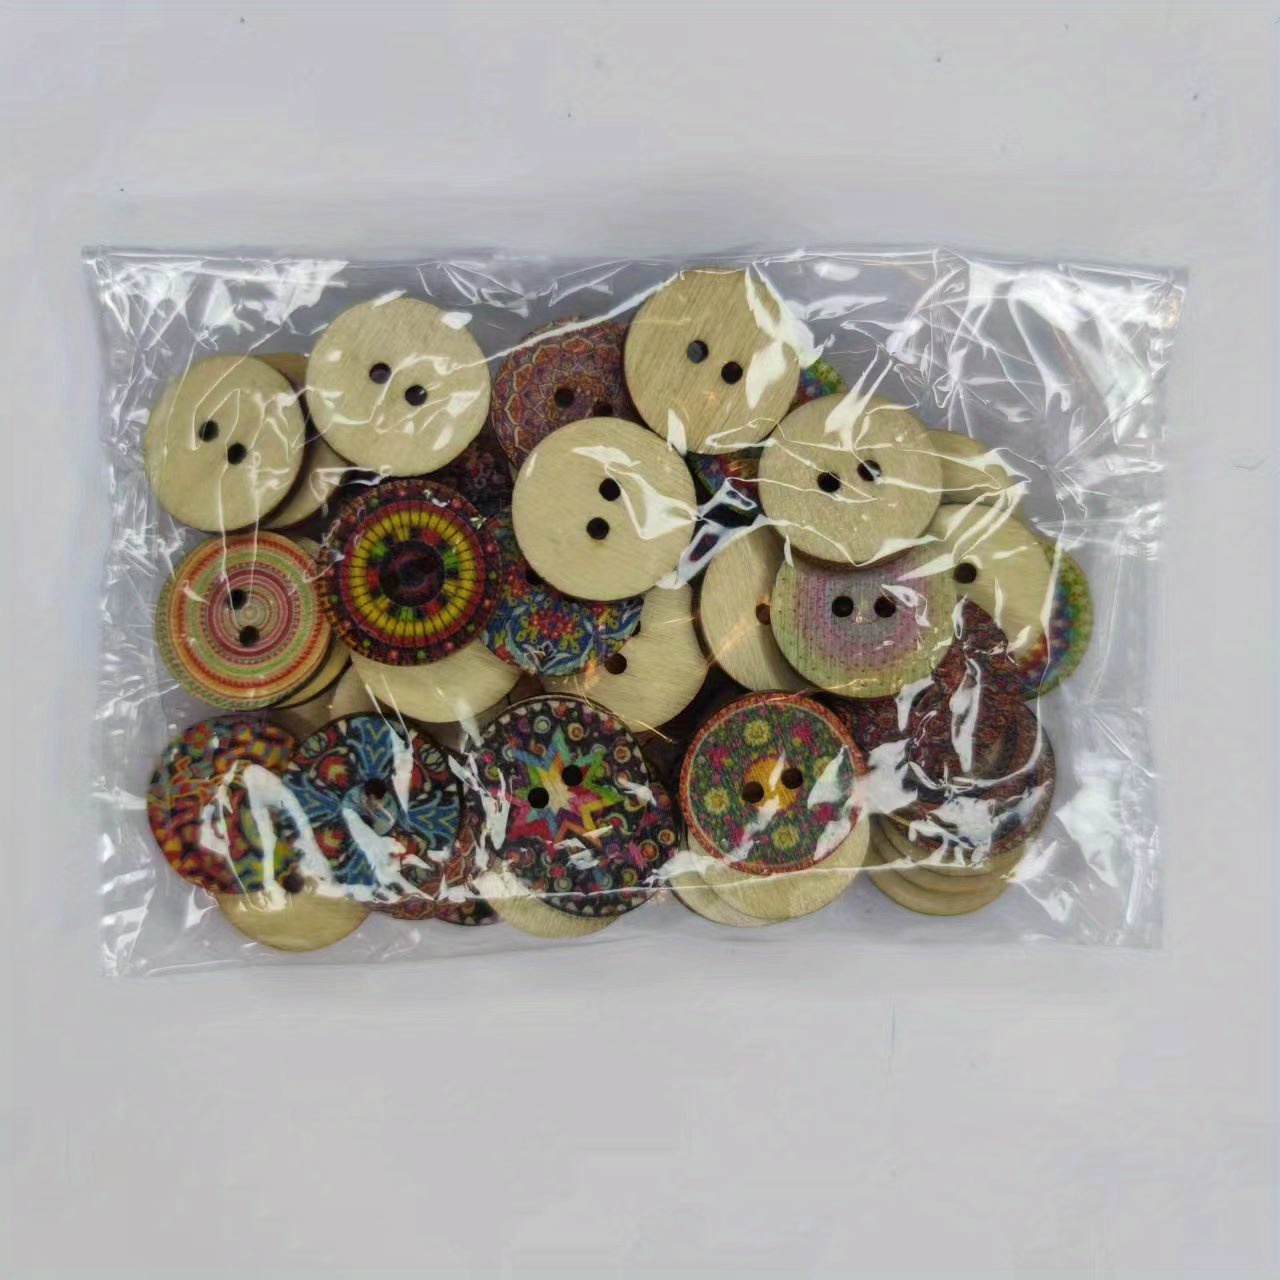 50Pcs 15mm Skull Painted 2 Hole Round Wooden Buttons For Crafts  Scrapbooking Clothing Decoration Sewing Accessory Wood Button